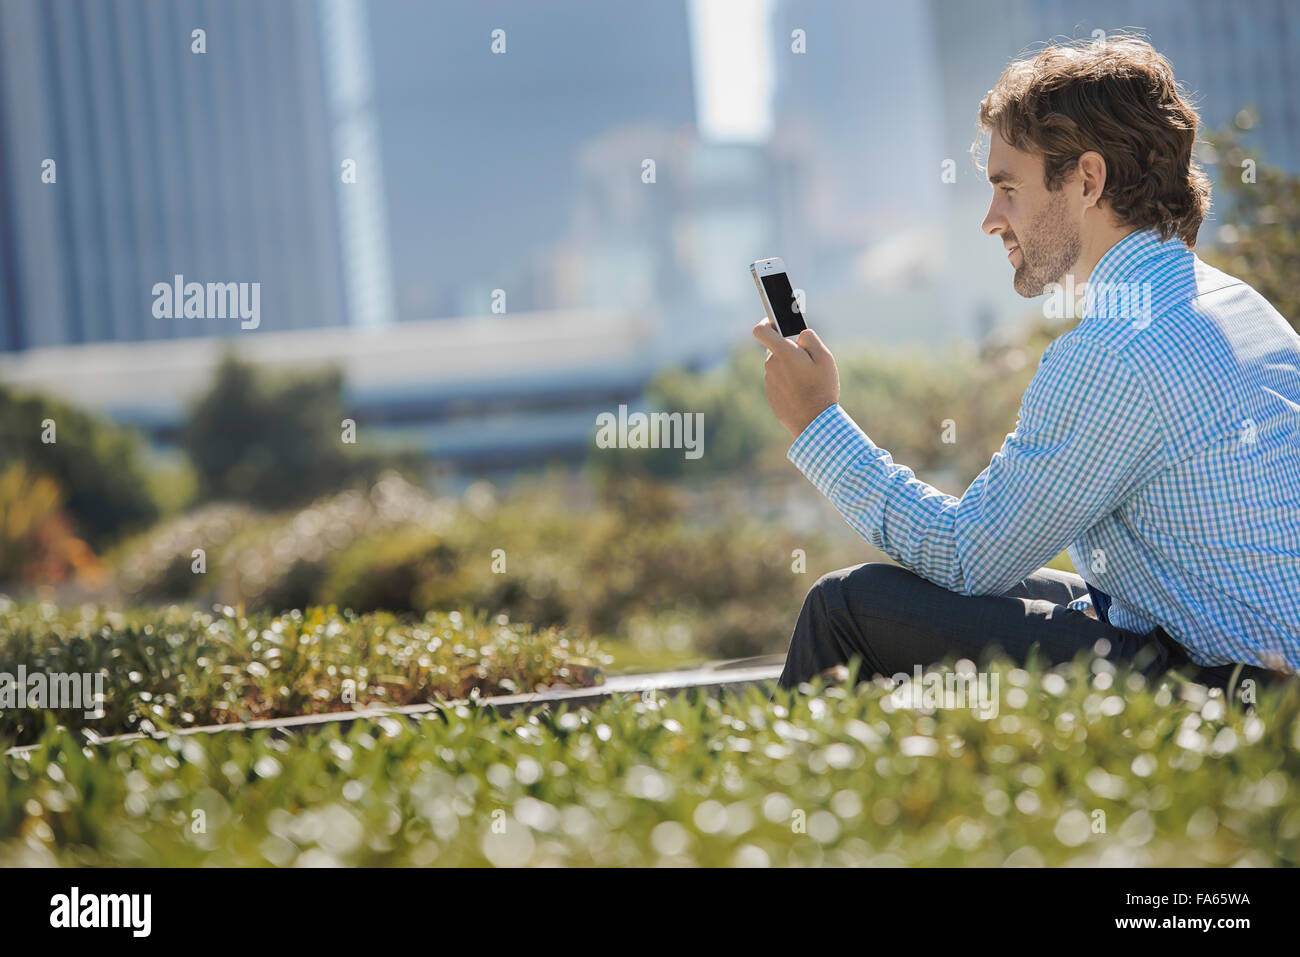 A young man on a park bench in the city, using a cell phone. Stock Photo